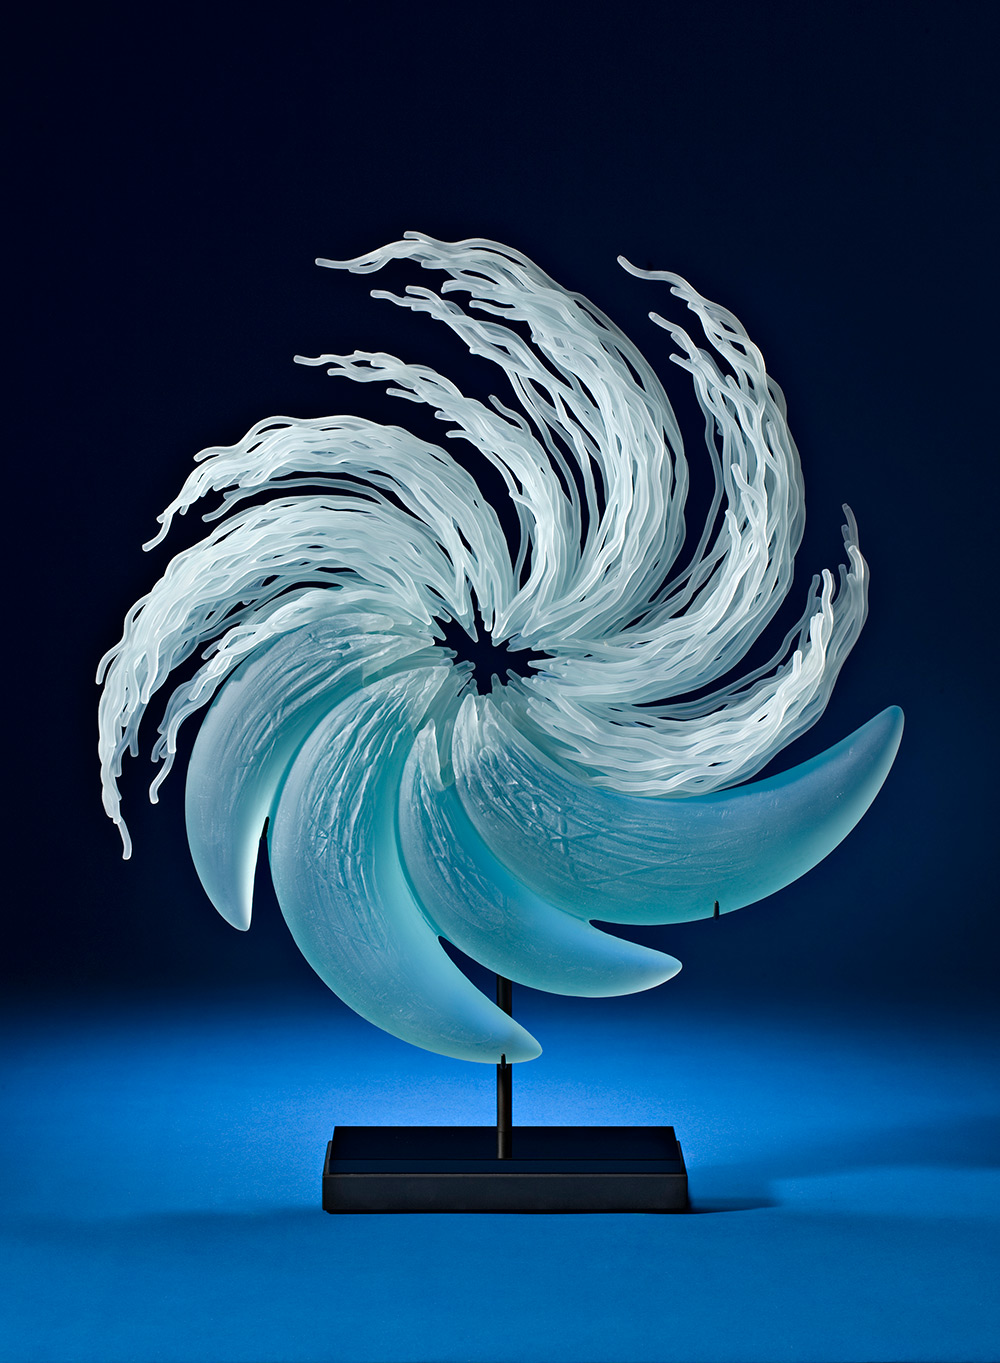 Sublime Glass Sculptures Inspired By Waves And Sea Creatures By K. William Lequier (7)